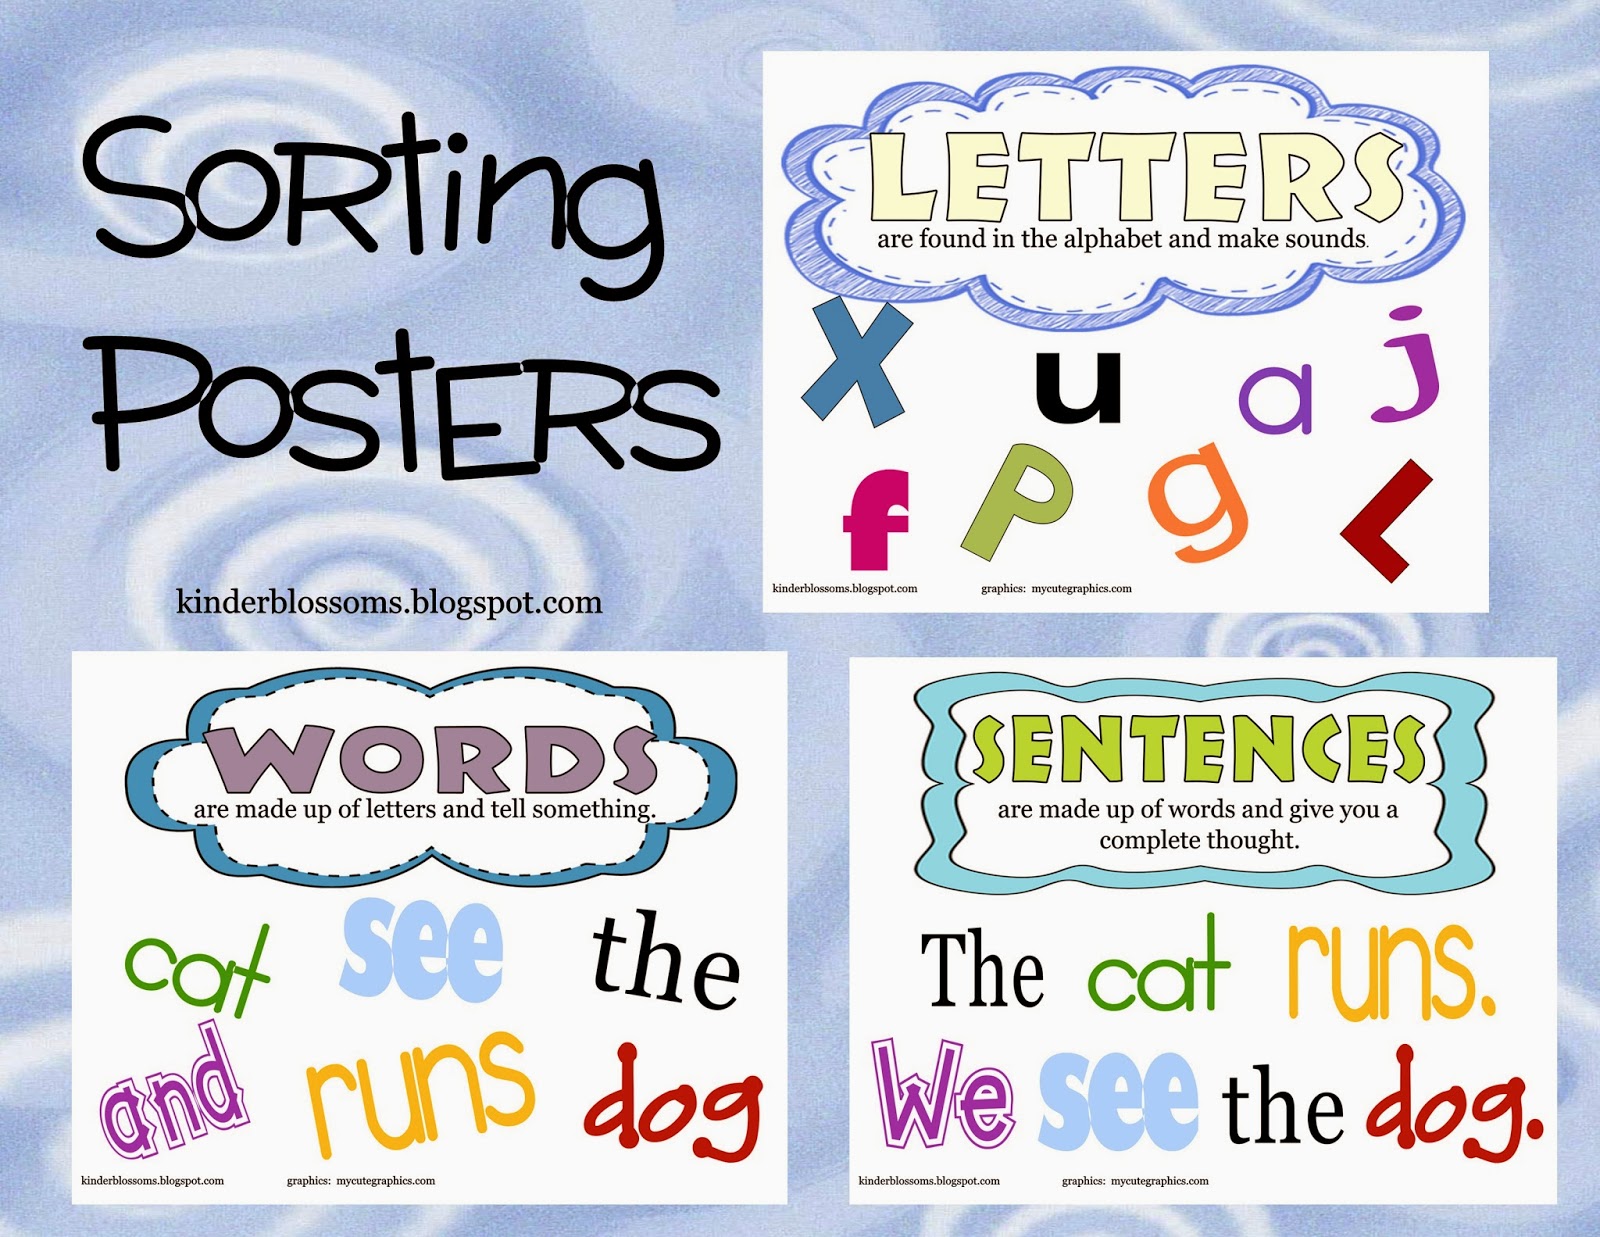 christina-s-kinder-blossoms-concepts-of-print-sorting-words-letters-sentences-freebies